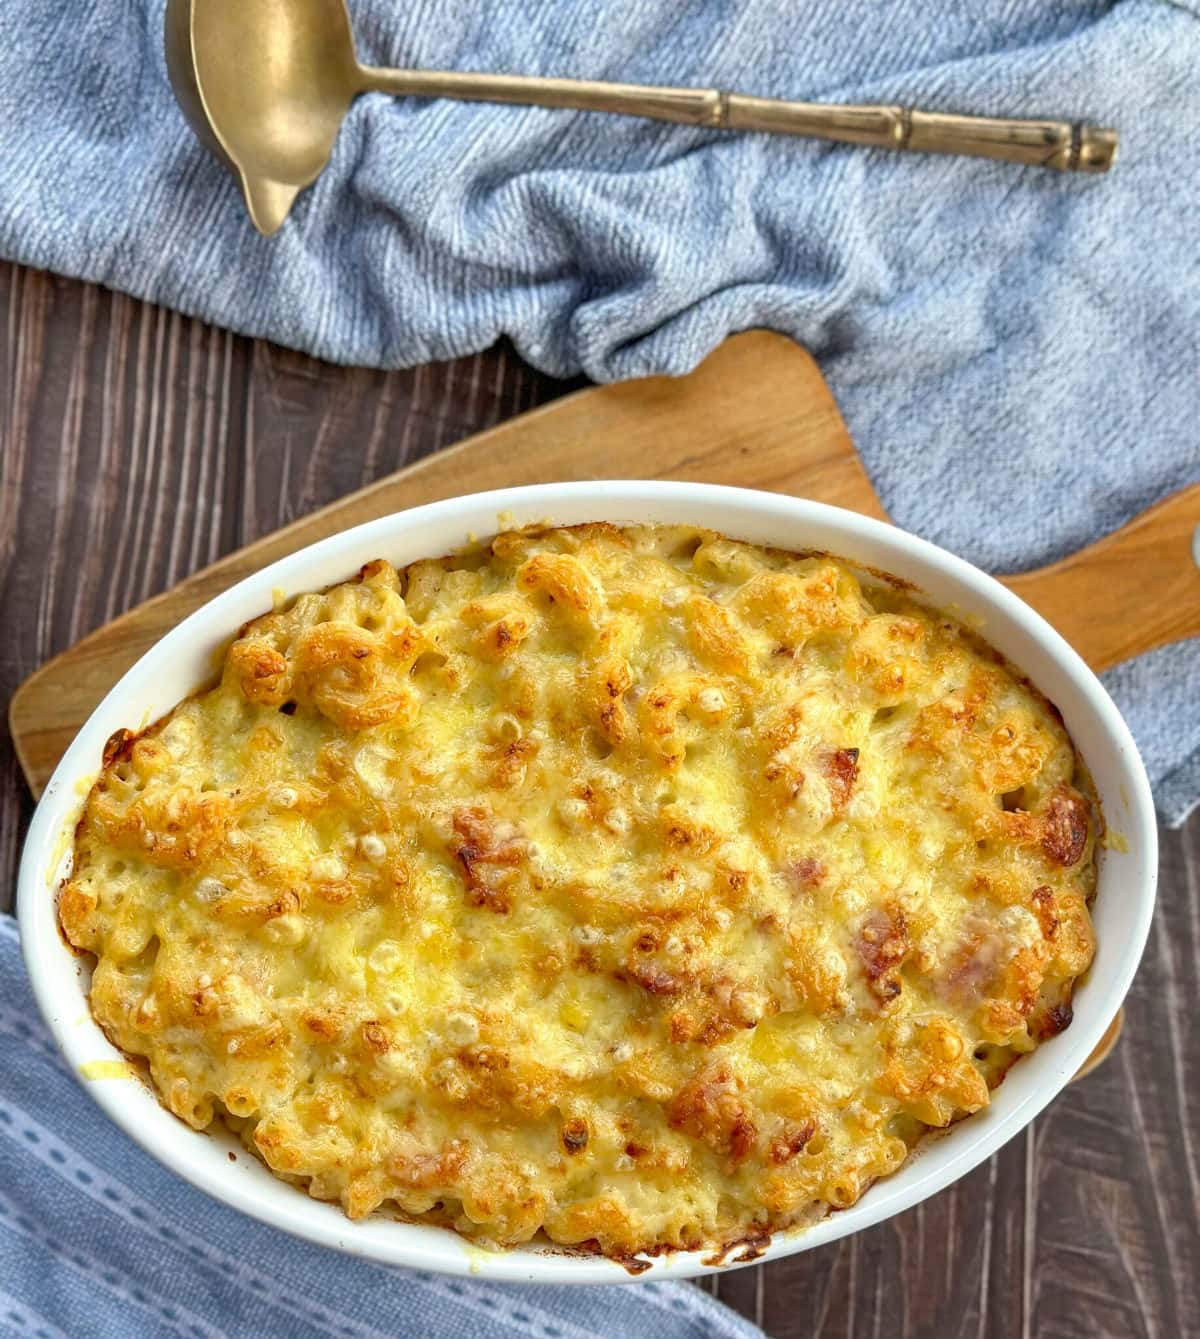 Golden Macaroni Cheese in a white oven dish